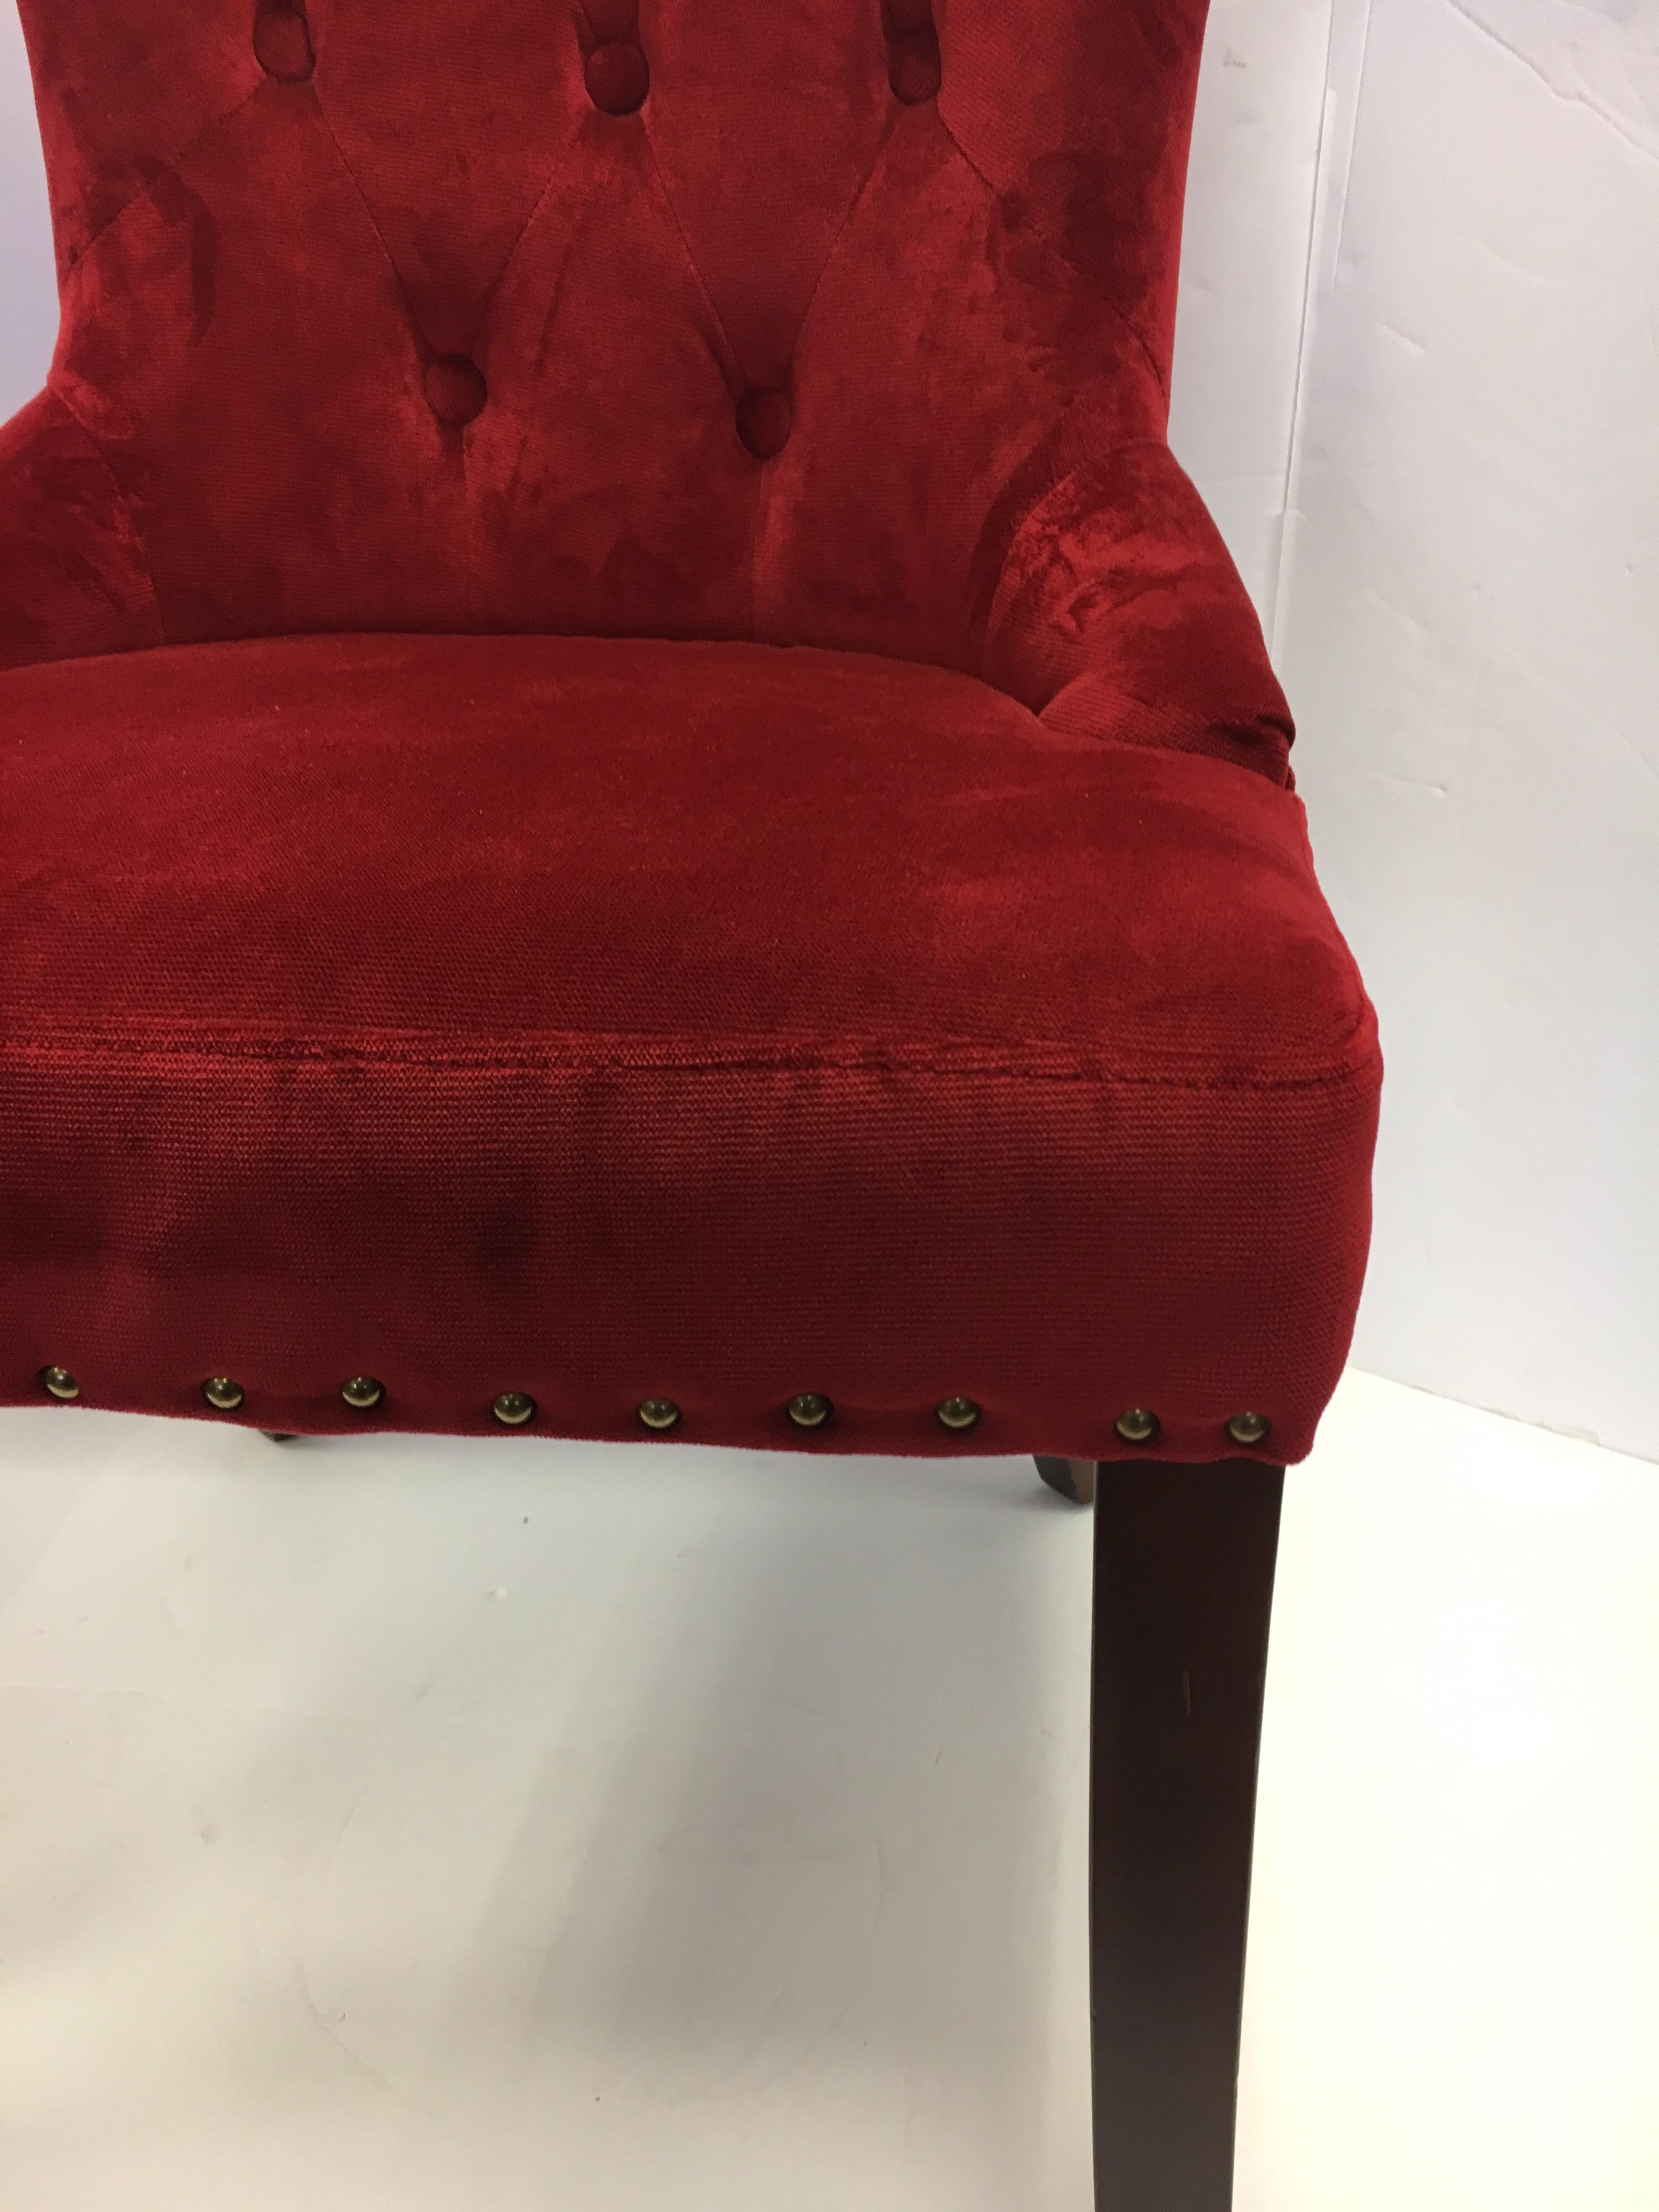 American Custom Upholstered Nailhead Red Tufted Dining Chair